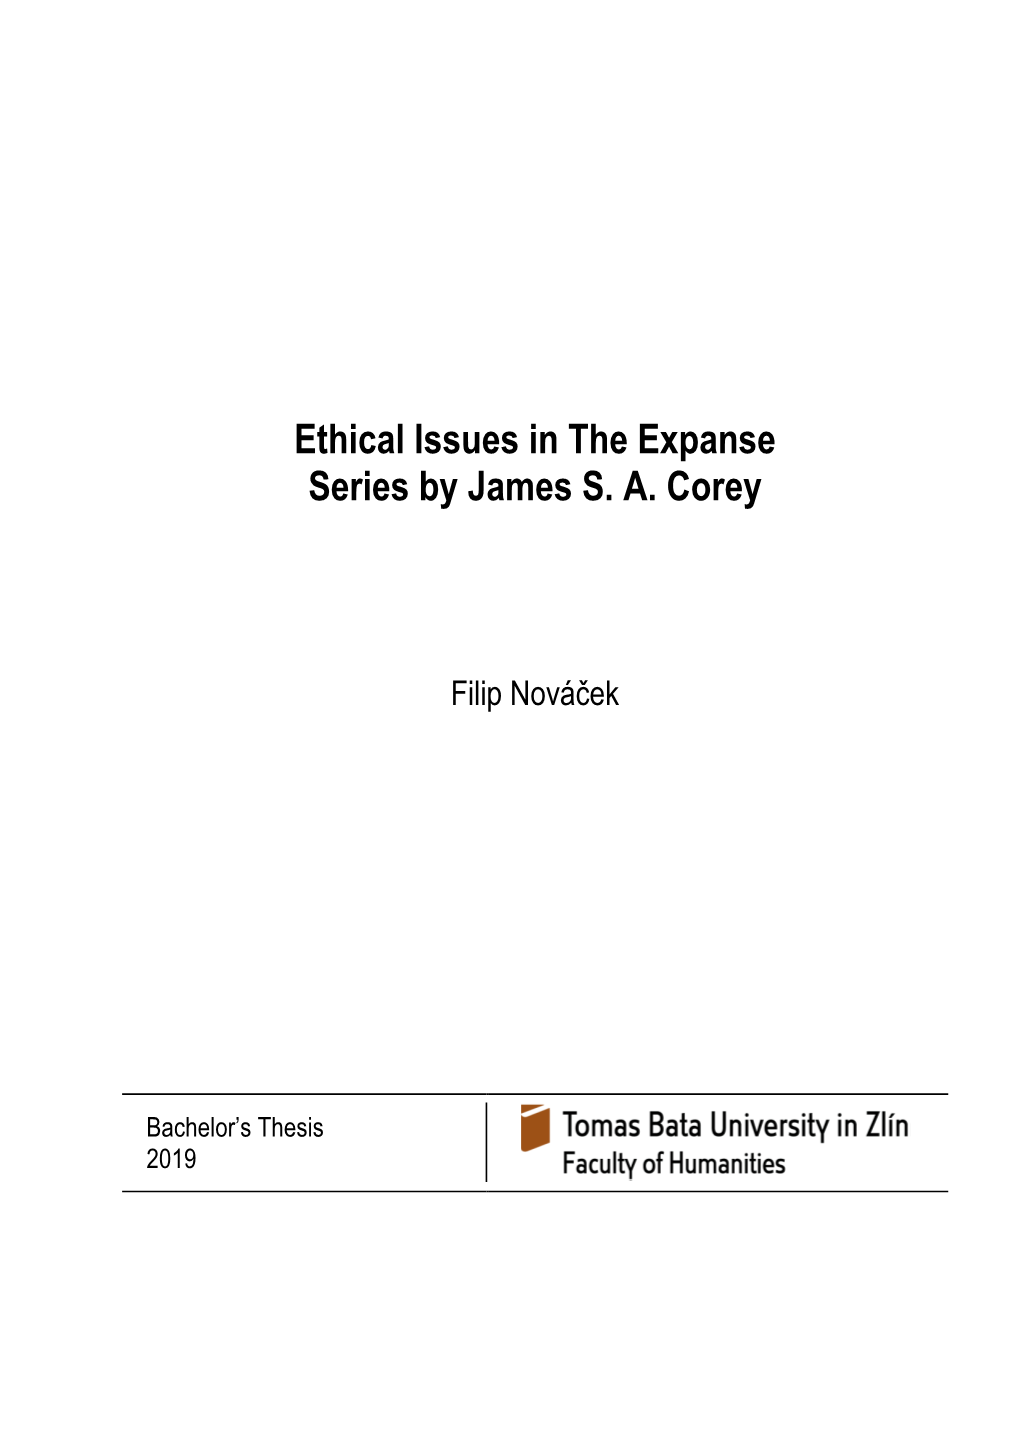 Ethical Issues in the Expanse Series by James SA Corey